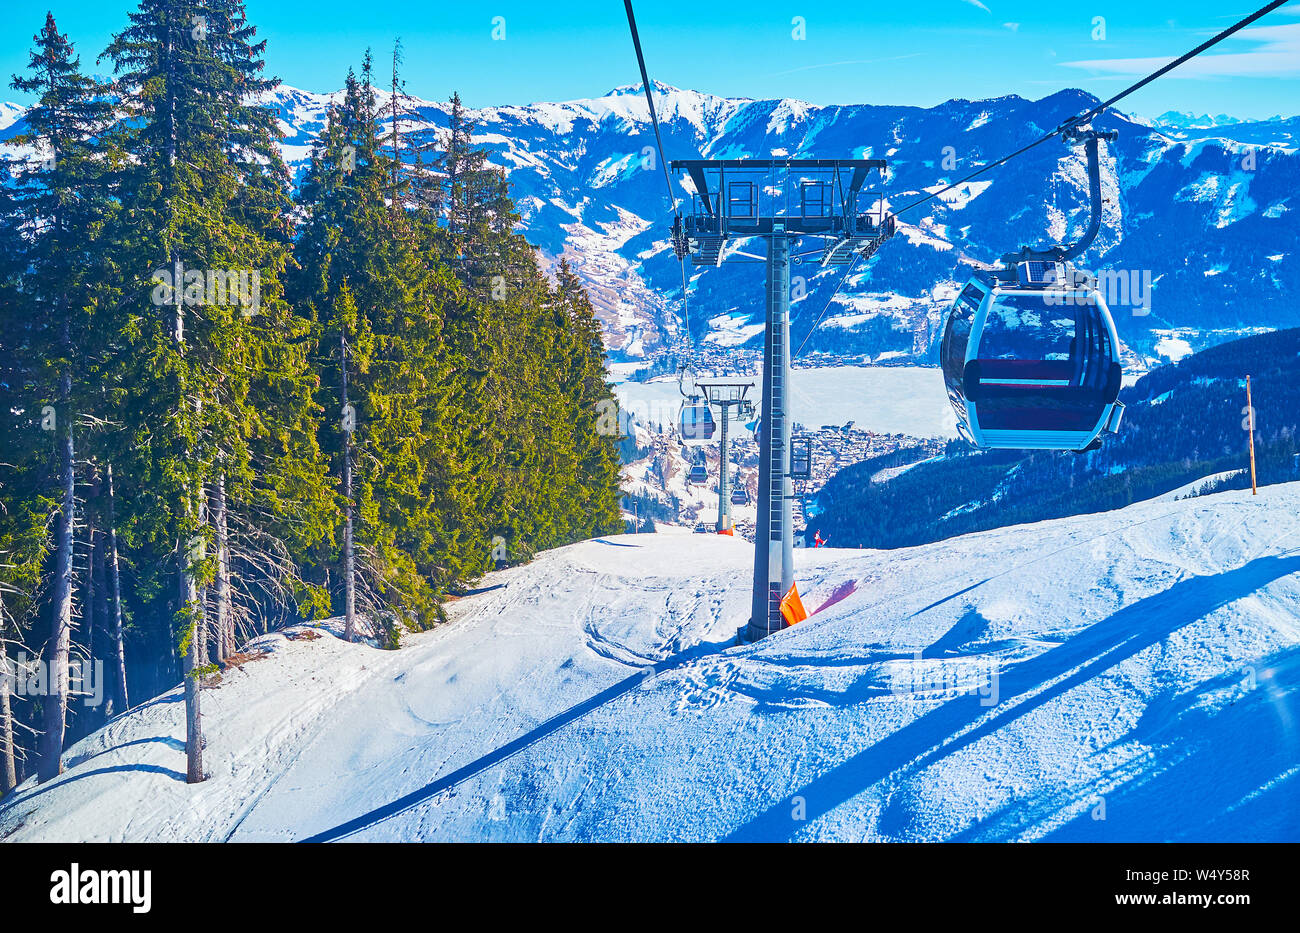 Trassxpress cableway journey is the perfect chance to overlook the slopes of Schmittenhohe mount, frozen Zeller see lake in valley, ski pistes and enj Stock Photo